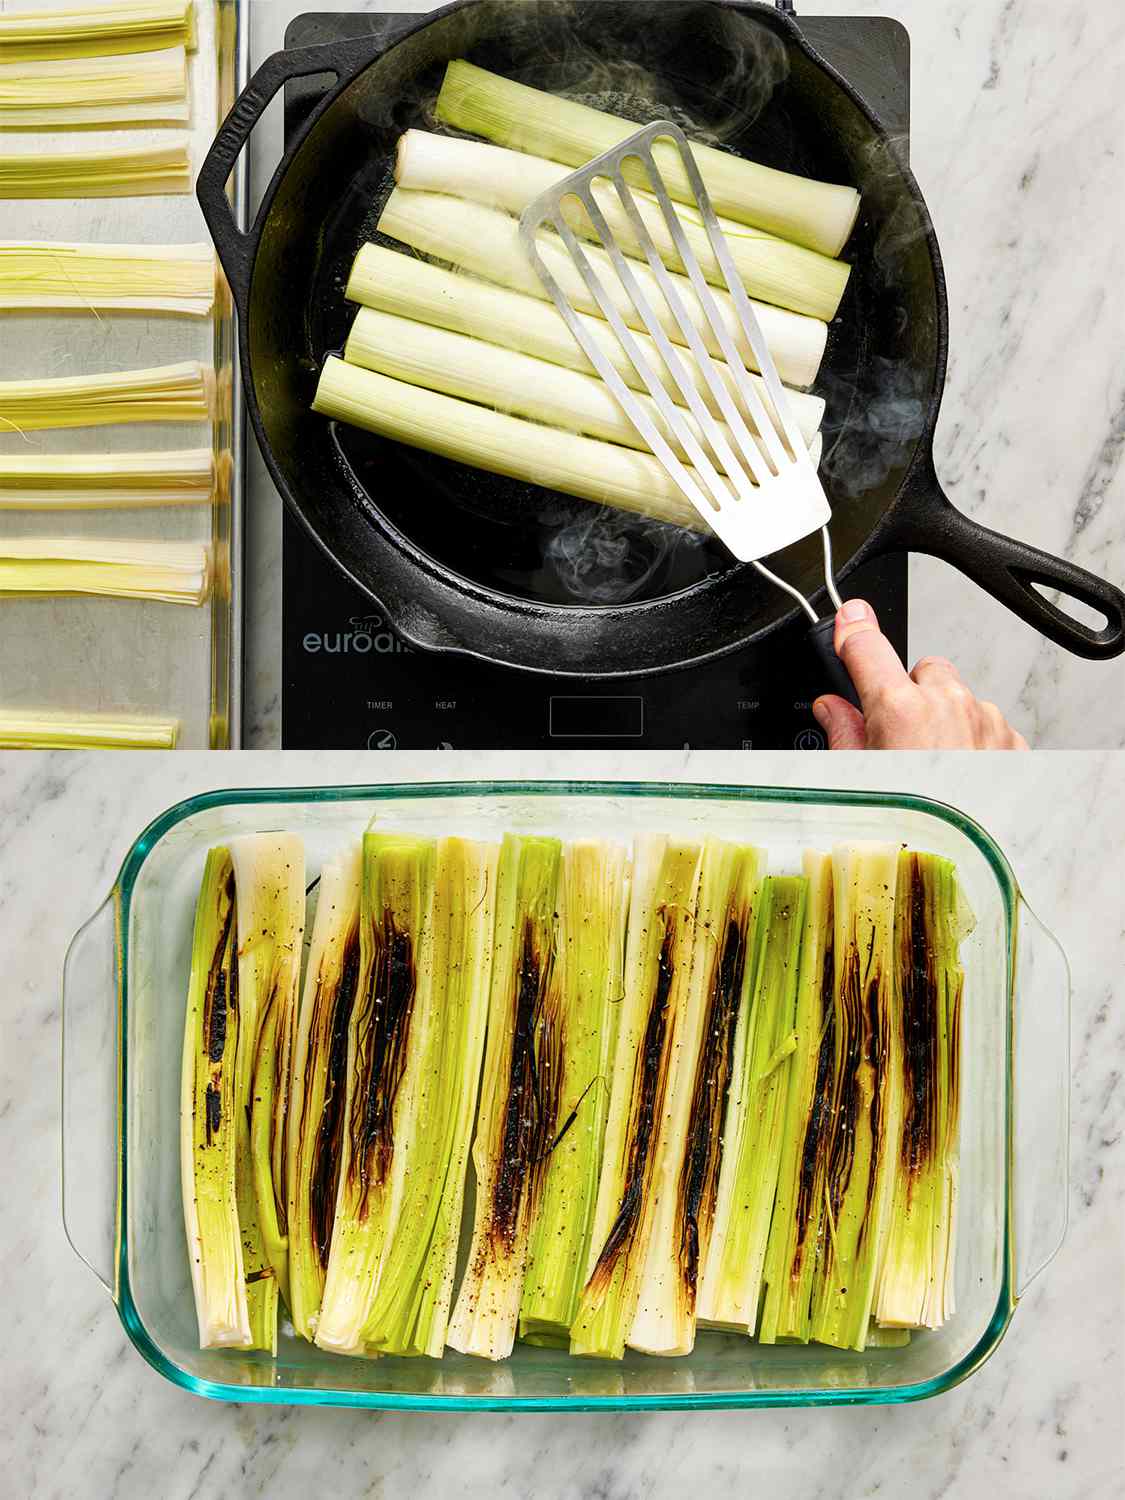 Two Image collage of leeks being pressed with a metal spatula into a hot cast iron skillet and then browned leeks being transferred to a pan.